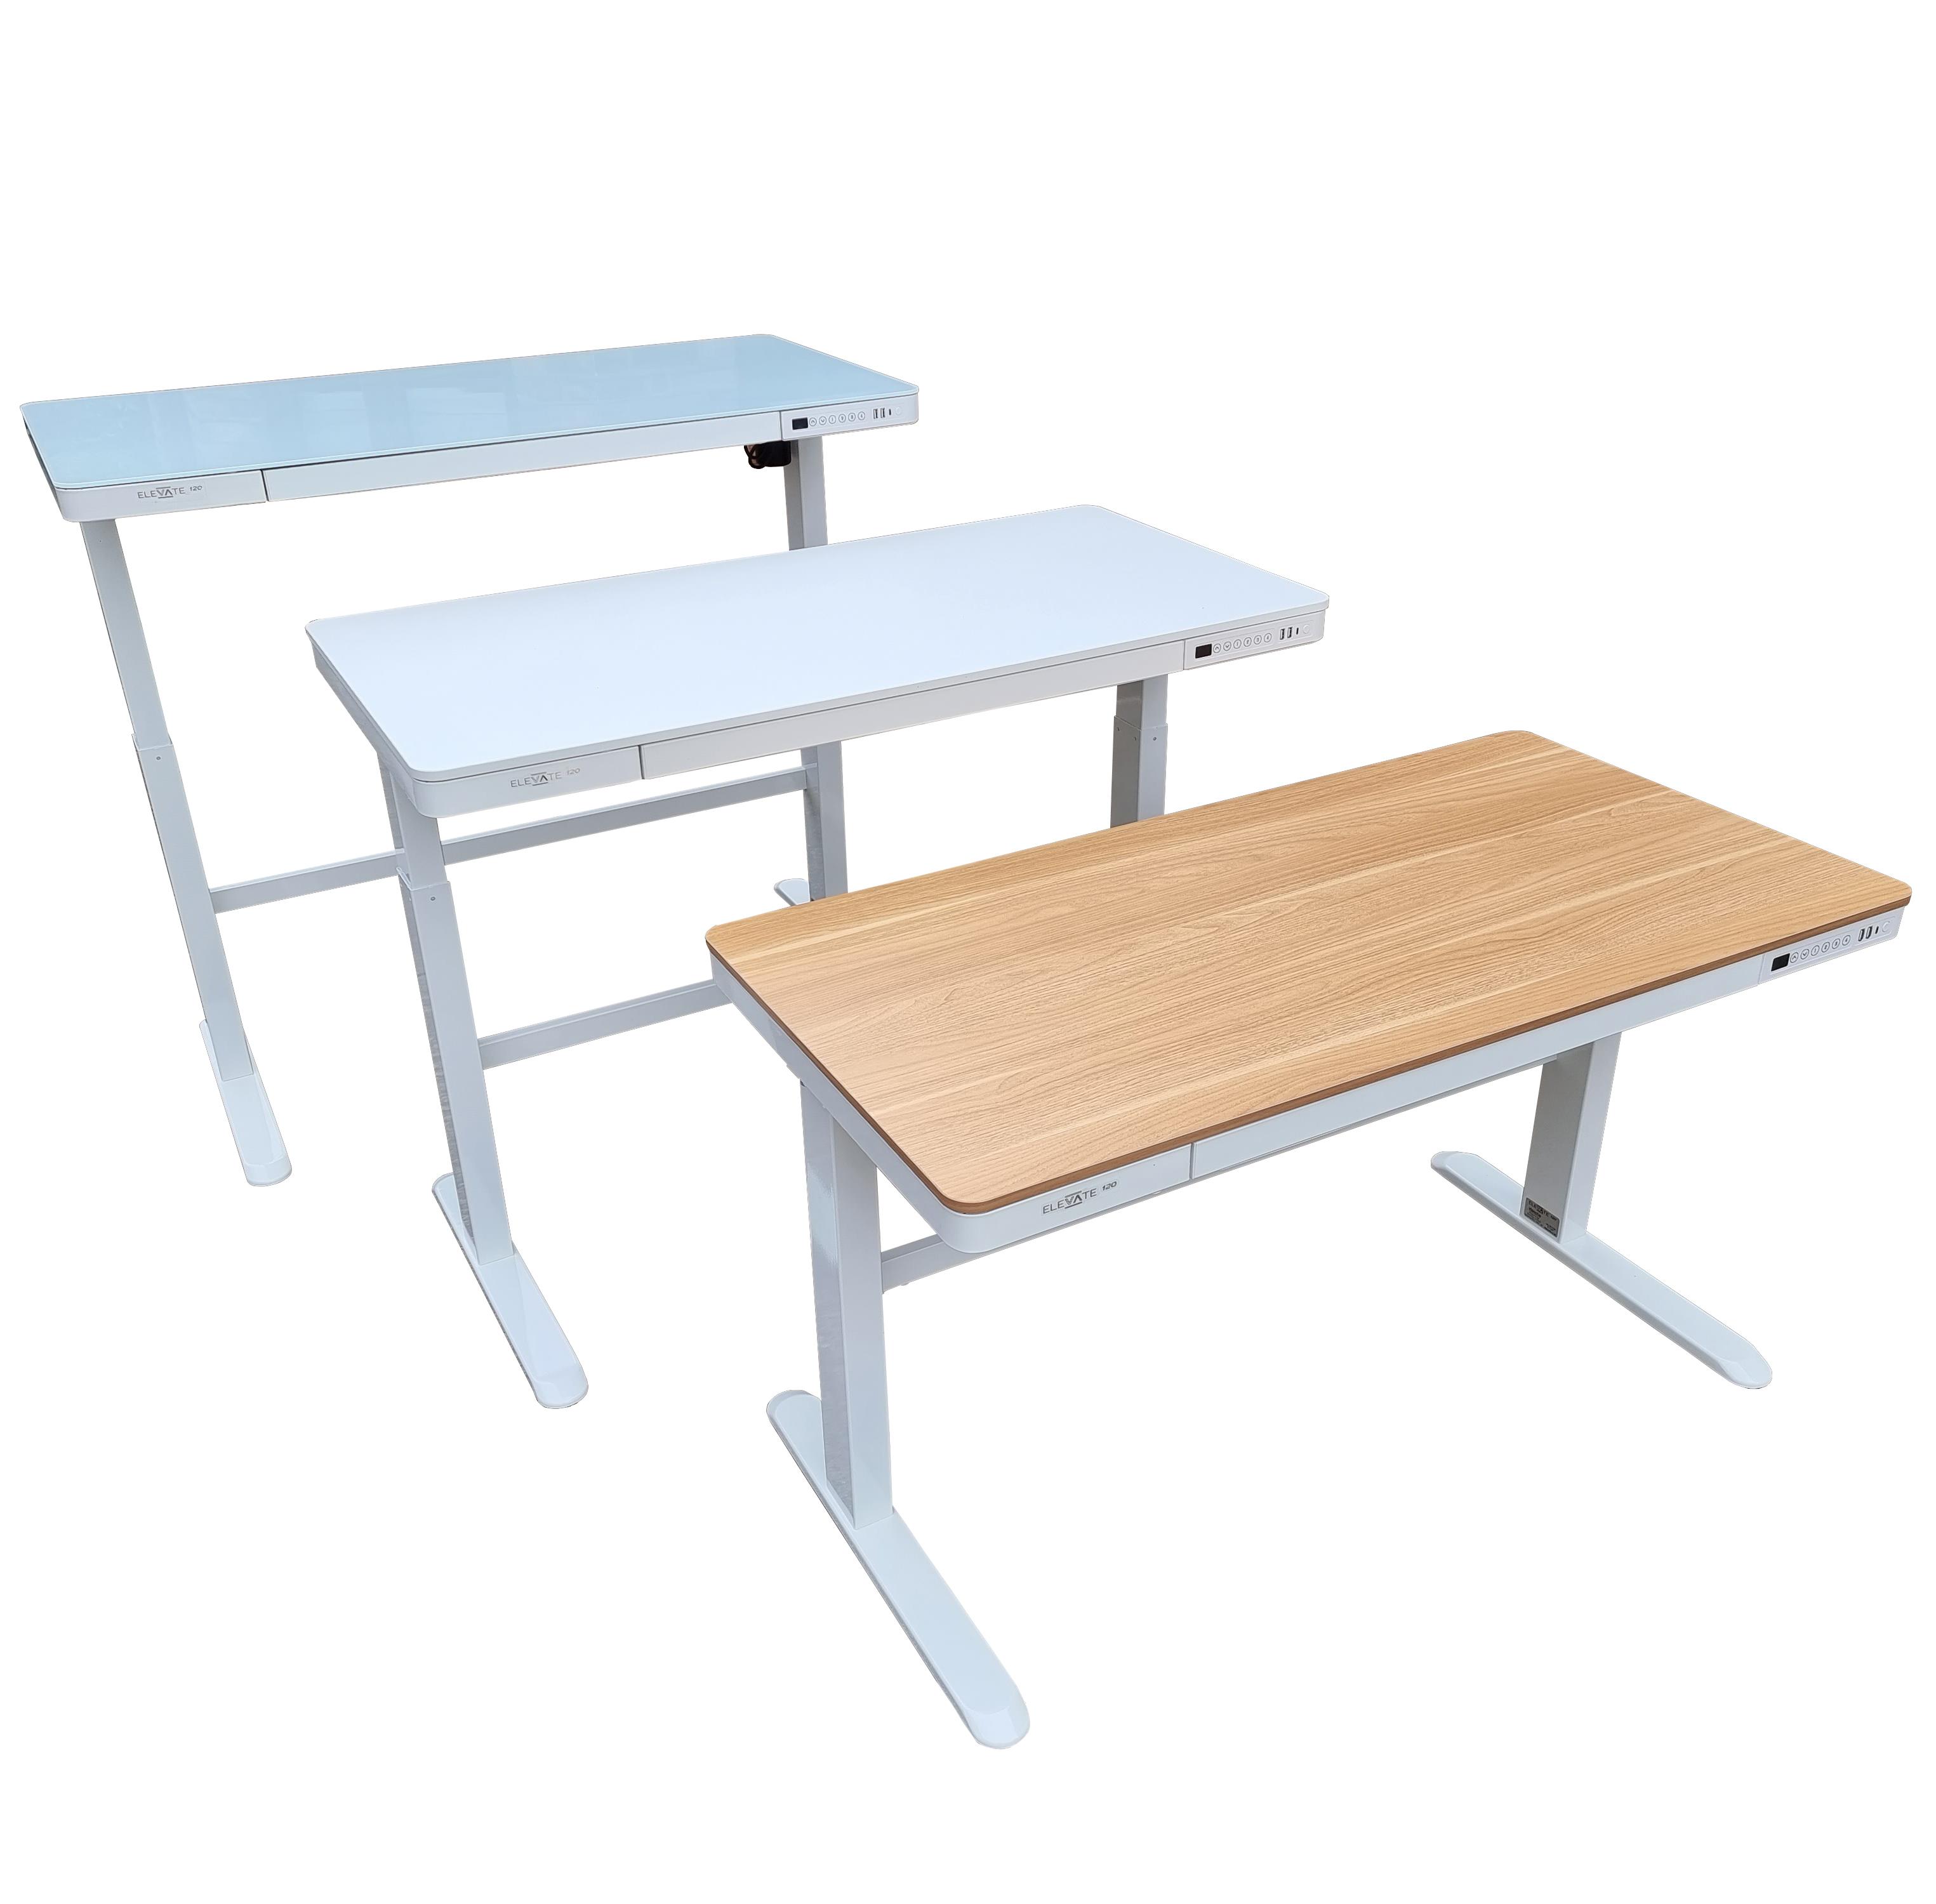 3 Elevate sit stand desks all with white bases, one with a white top, one with an oak top and one with a white glass top